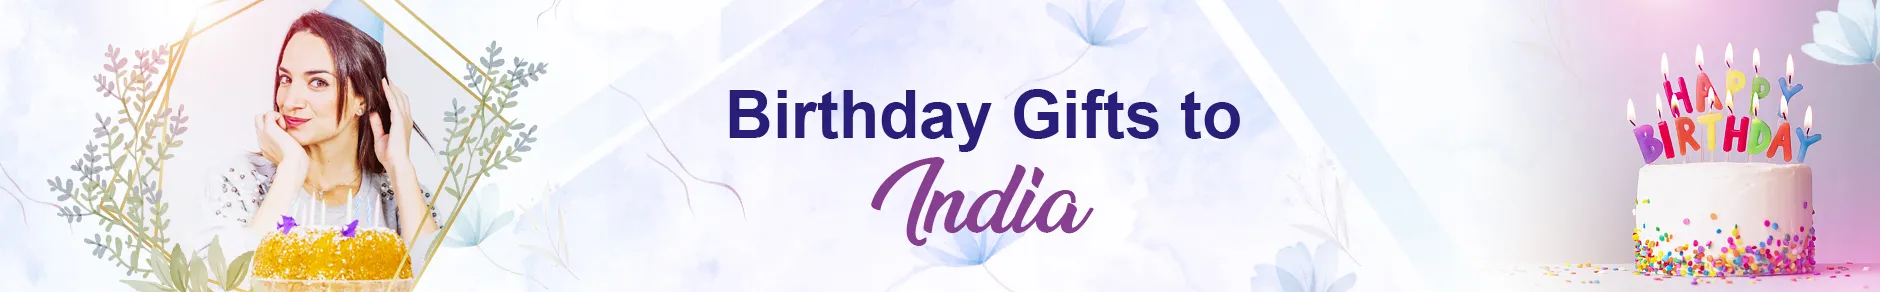 Birthday Gifts to India